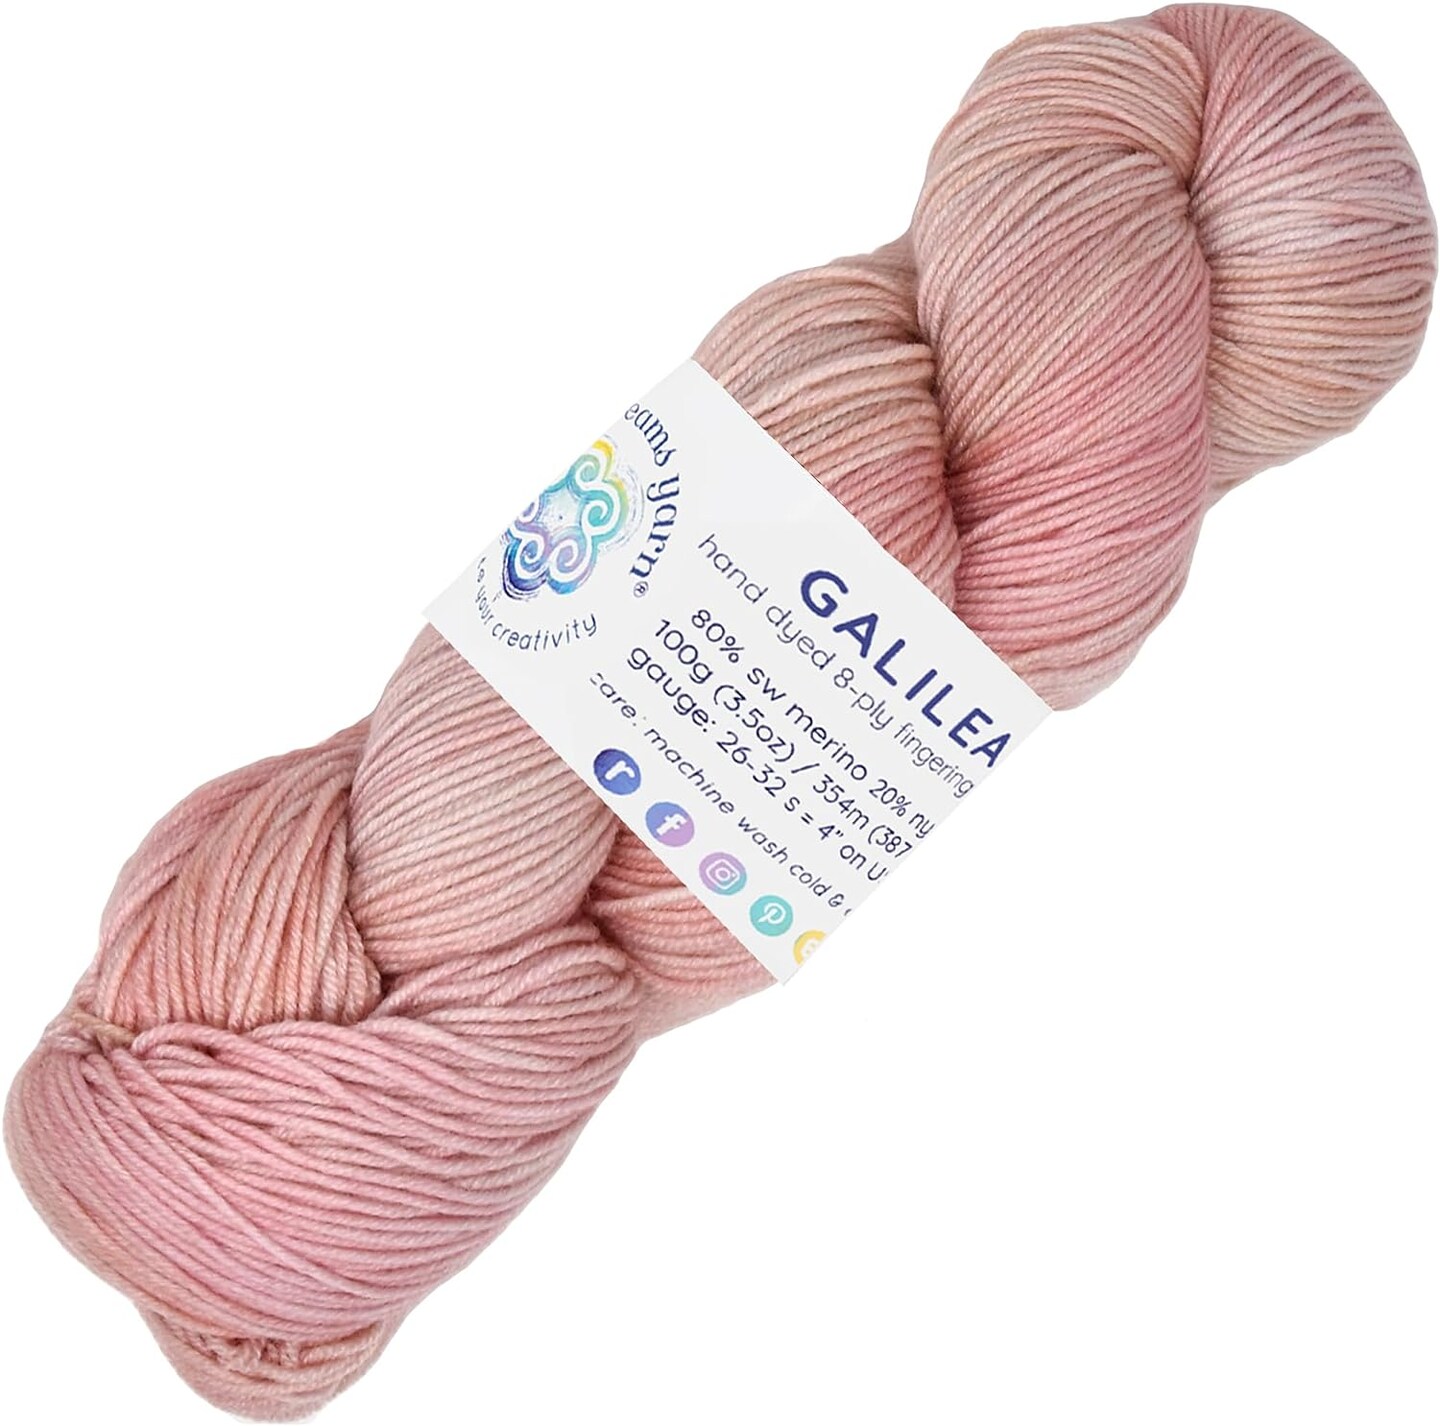 Living Dreams Yarn Galilea: Colorful Superwash Merino Sock Yarn. Super Soft and Strong. Hand Dyed to Perfection